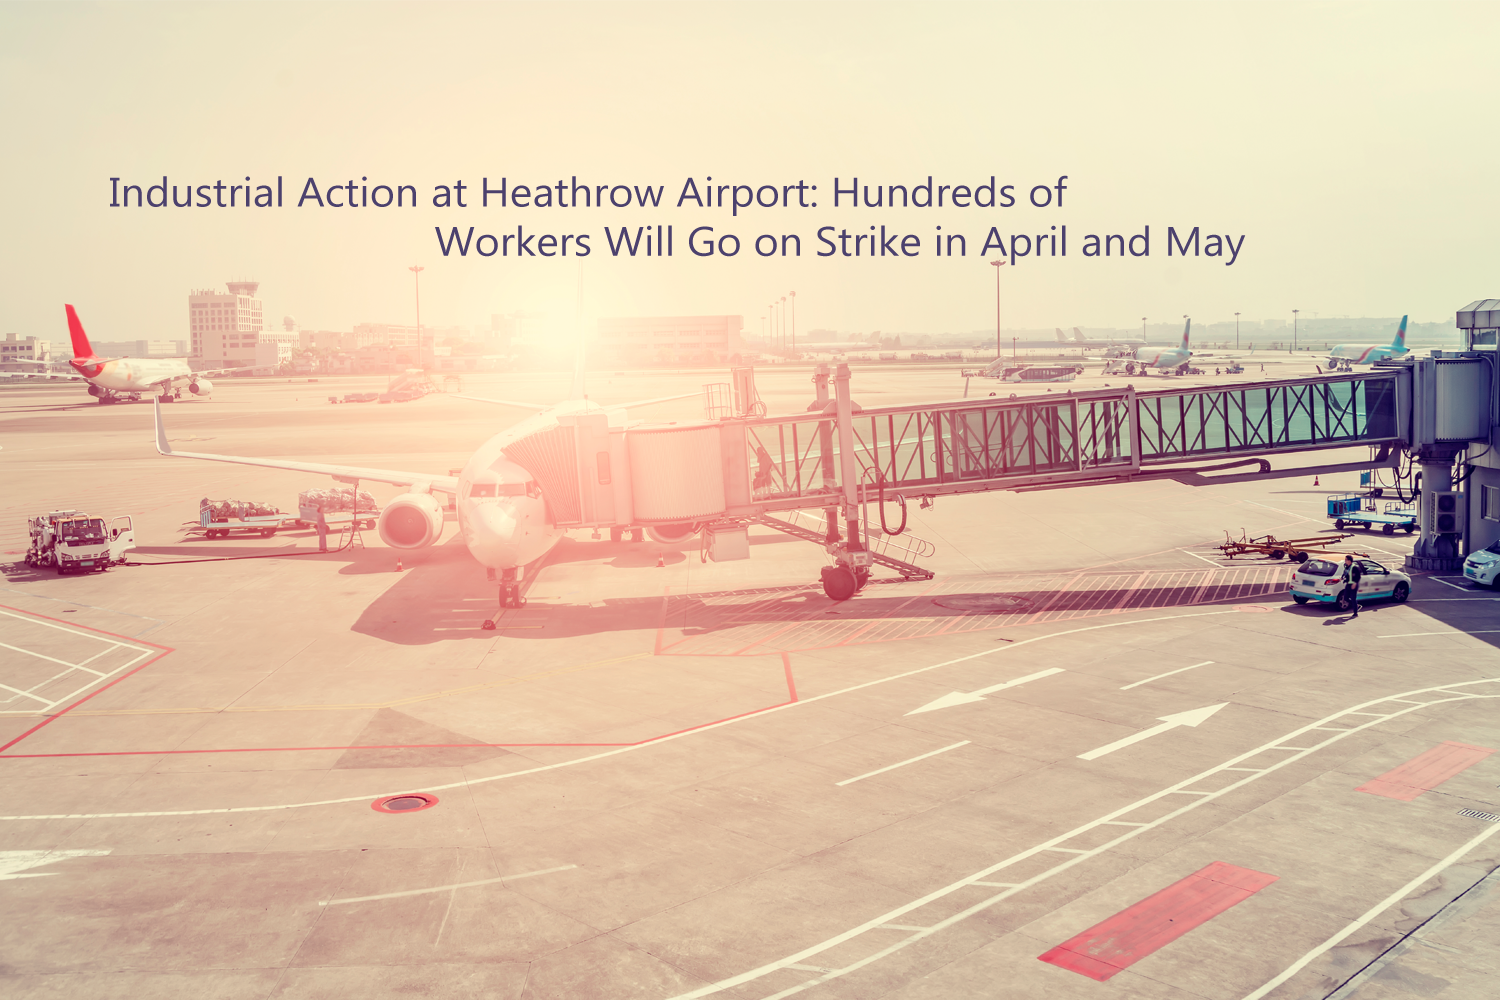 Industrial Action at Heathrow Airport: Hundreds of Workers Will Go on Strike in April and May